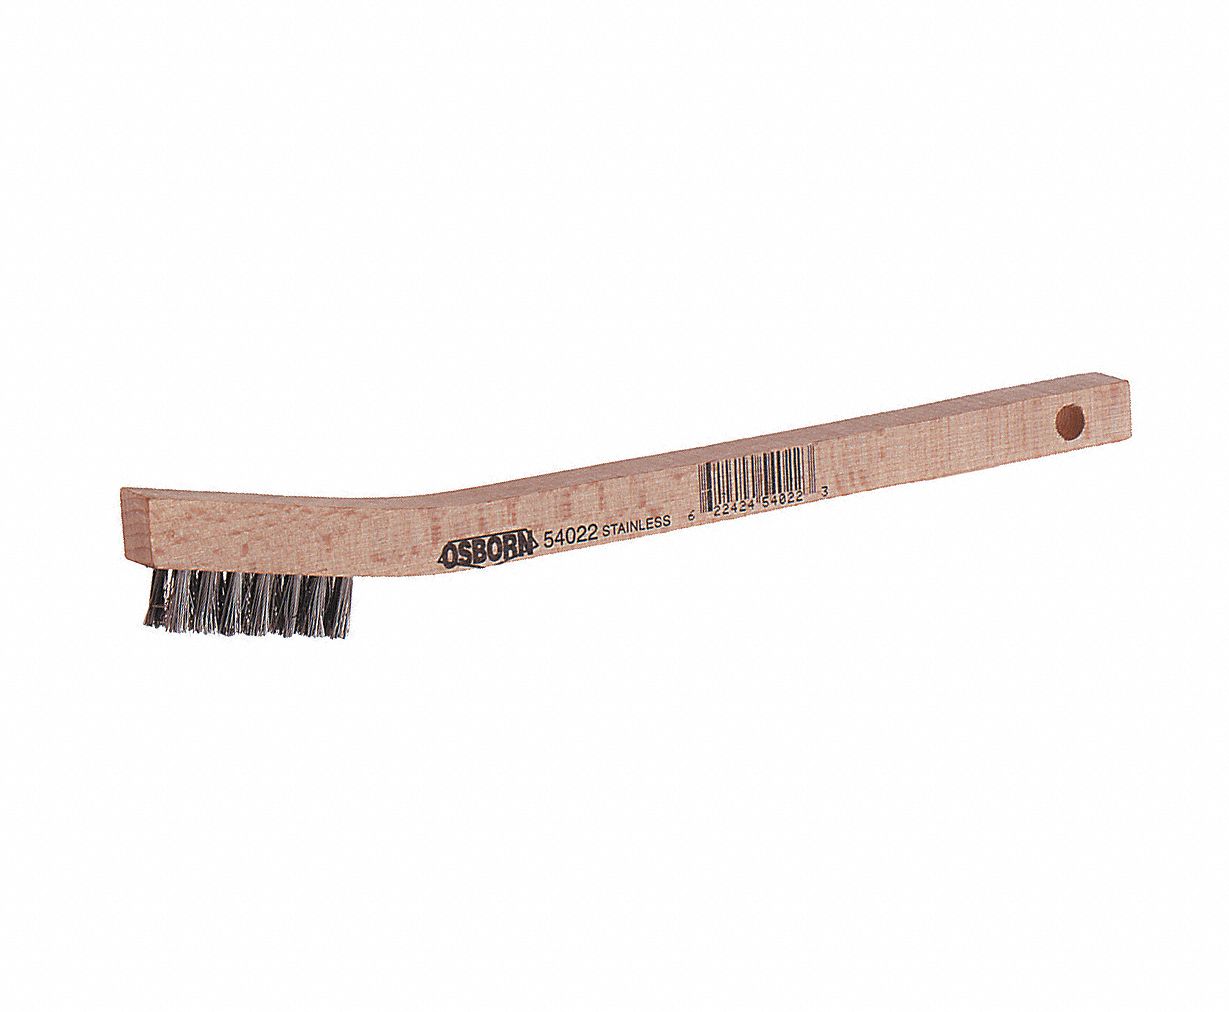 OSBORN SCRATCH BRUSH, ANGLED HANDLE, 3 X 7 ROWS, 7 3/4 IN OAL/1 7/16 IN  BRUSH/7/16 TRIM, STAINLESS/WOOD - Scratch Brushes - OSB54022